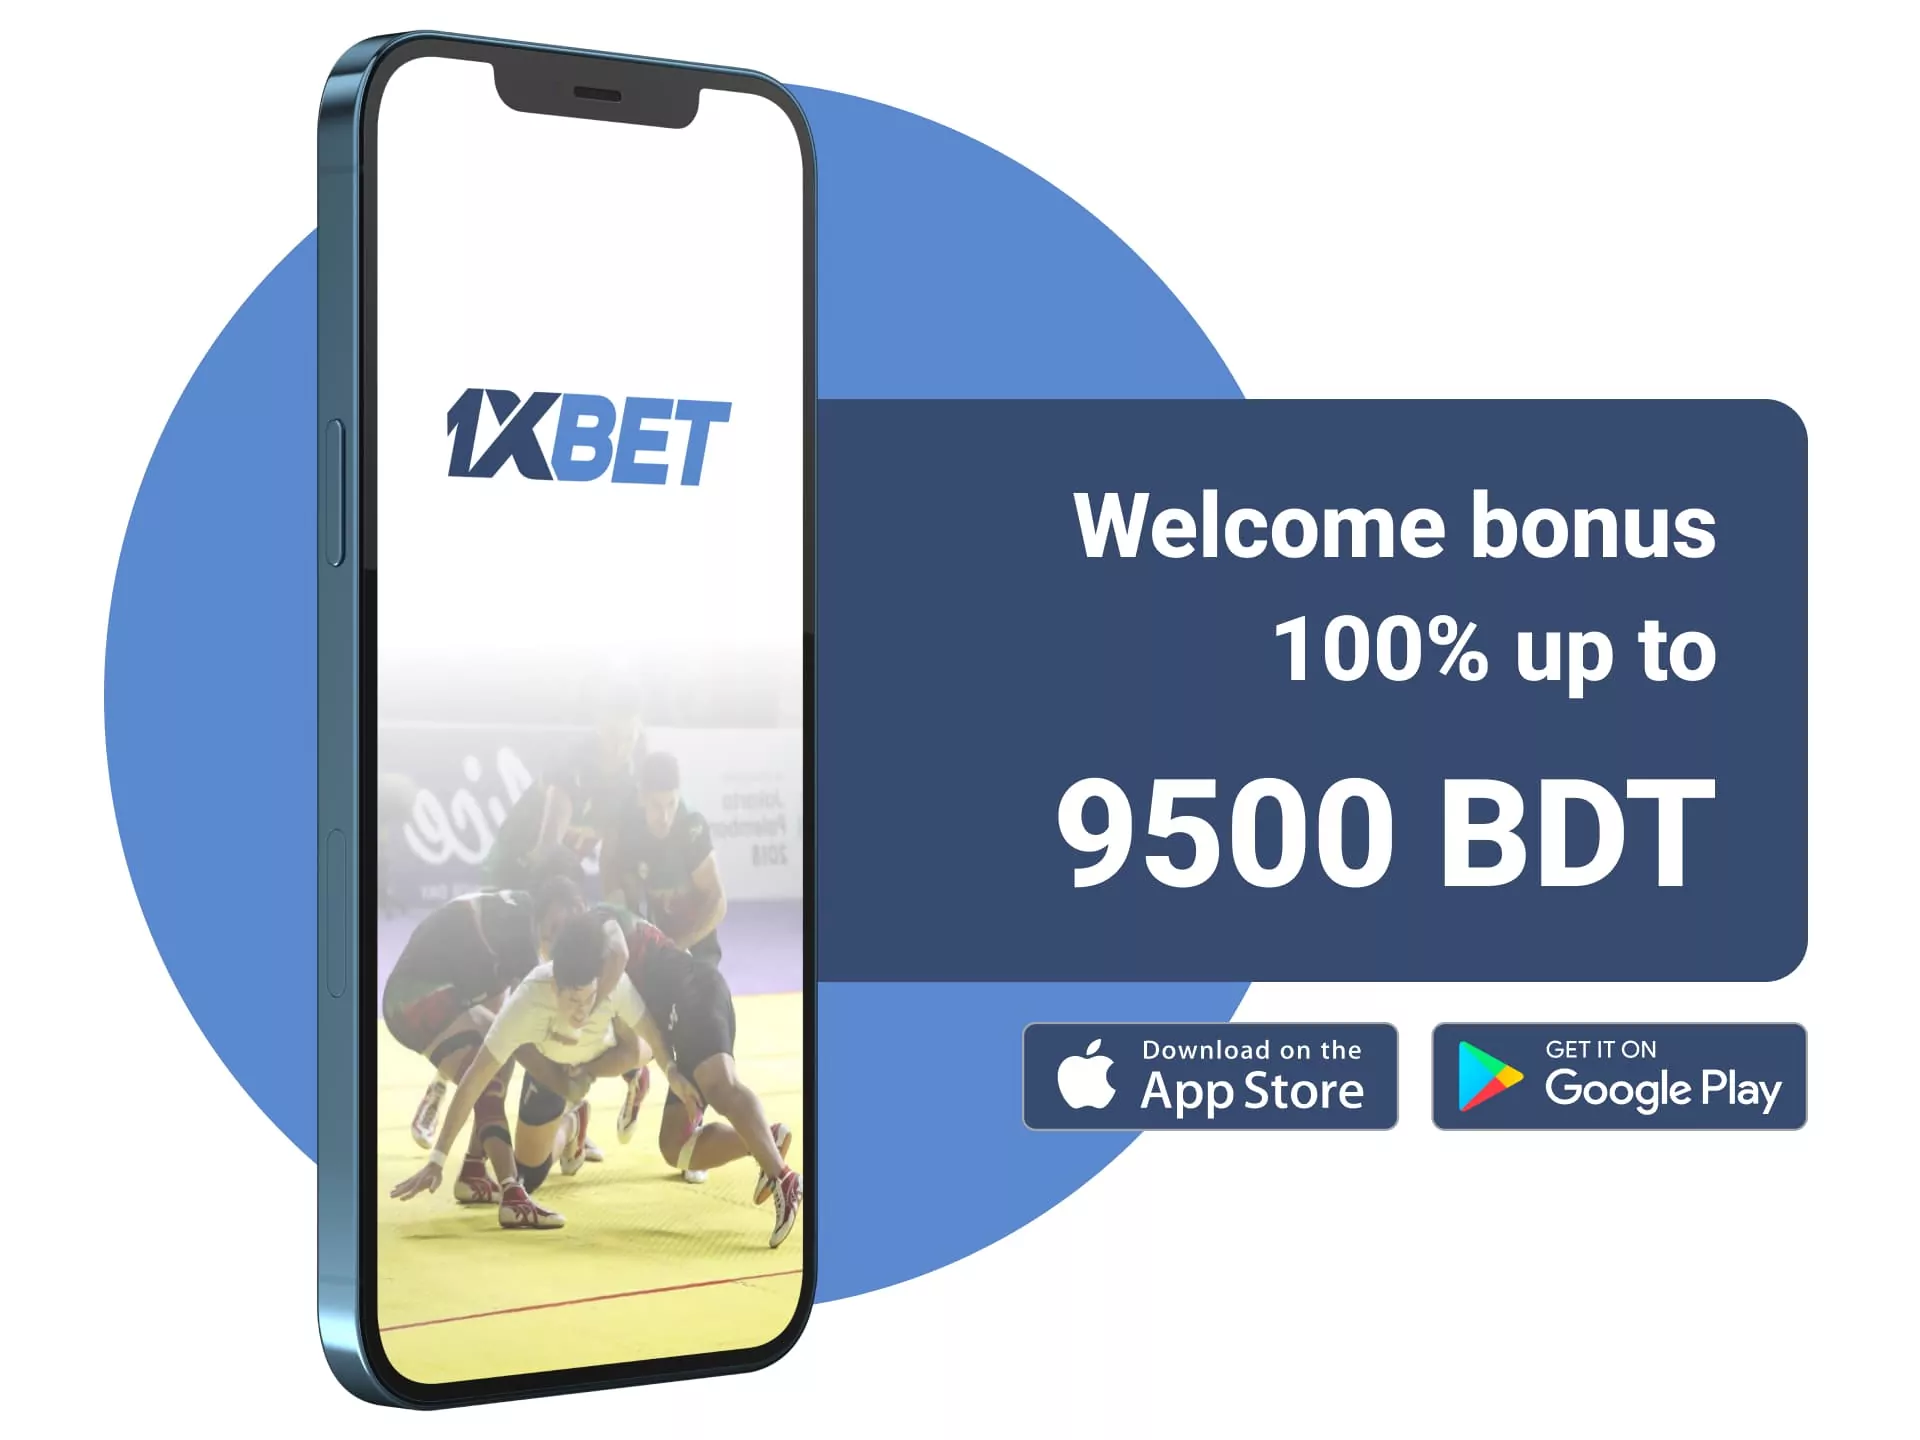 1xbet kabaddi betting site with bet builder and welcome bonus: 9500 BDT,